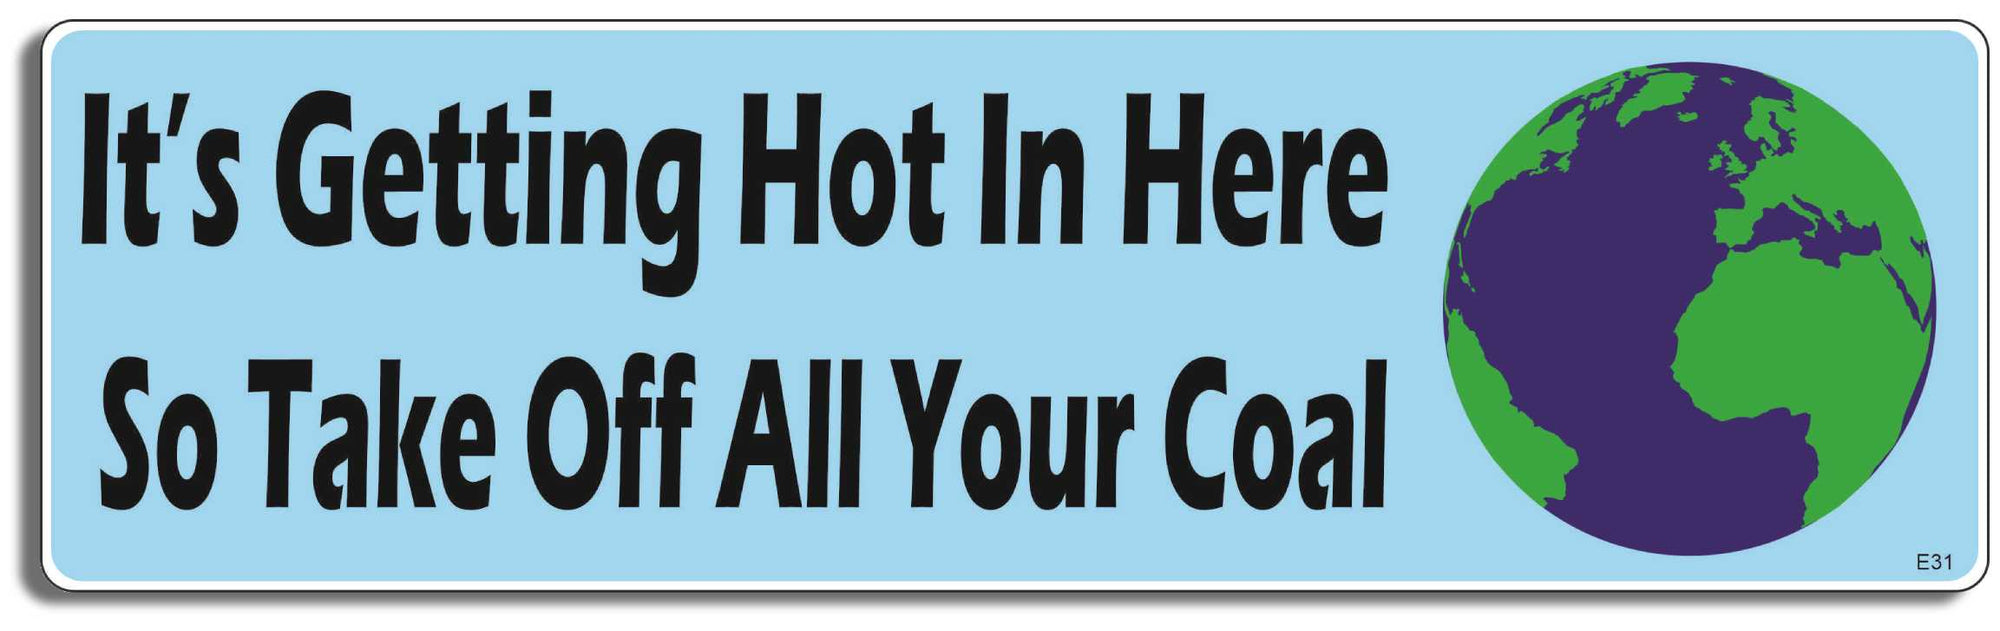 It's Getting Hot In Here So Take Off All Your Coal - 3" x 10 -  Decal Bumper Sticker-environmental Bumper Sticker Car Magnet It's Getting Hot In Here So Take-  Decal for carsenvironment, political